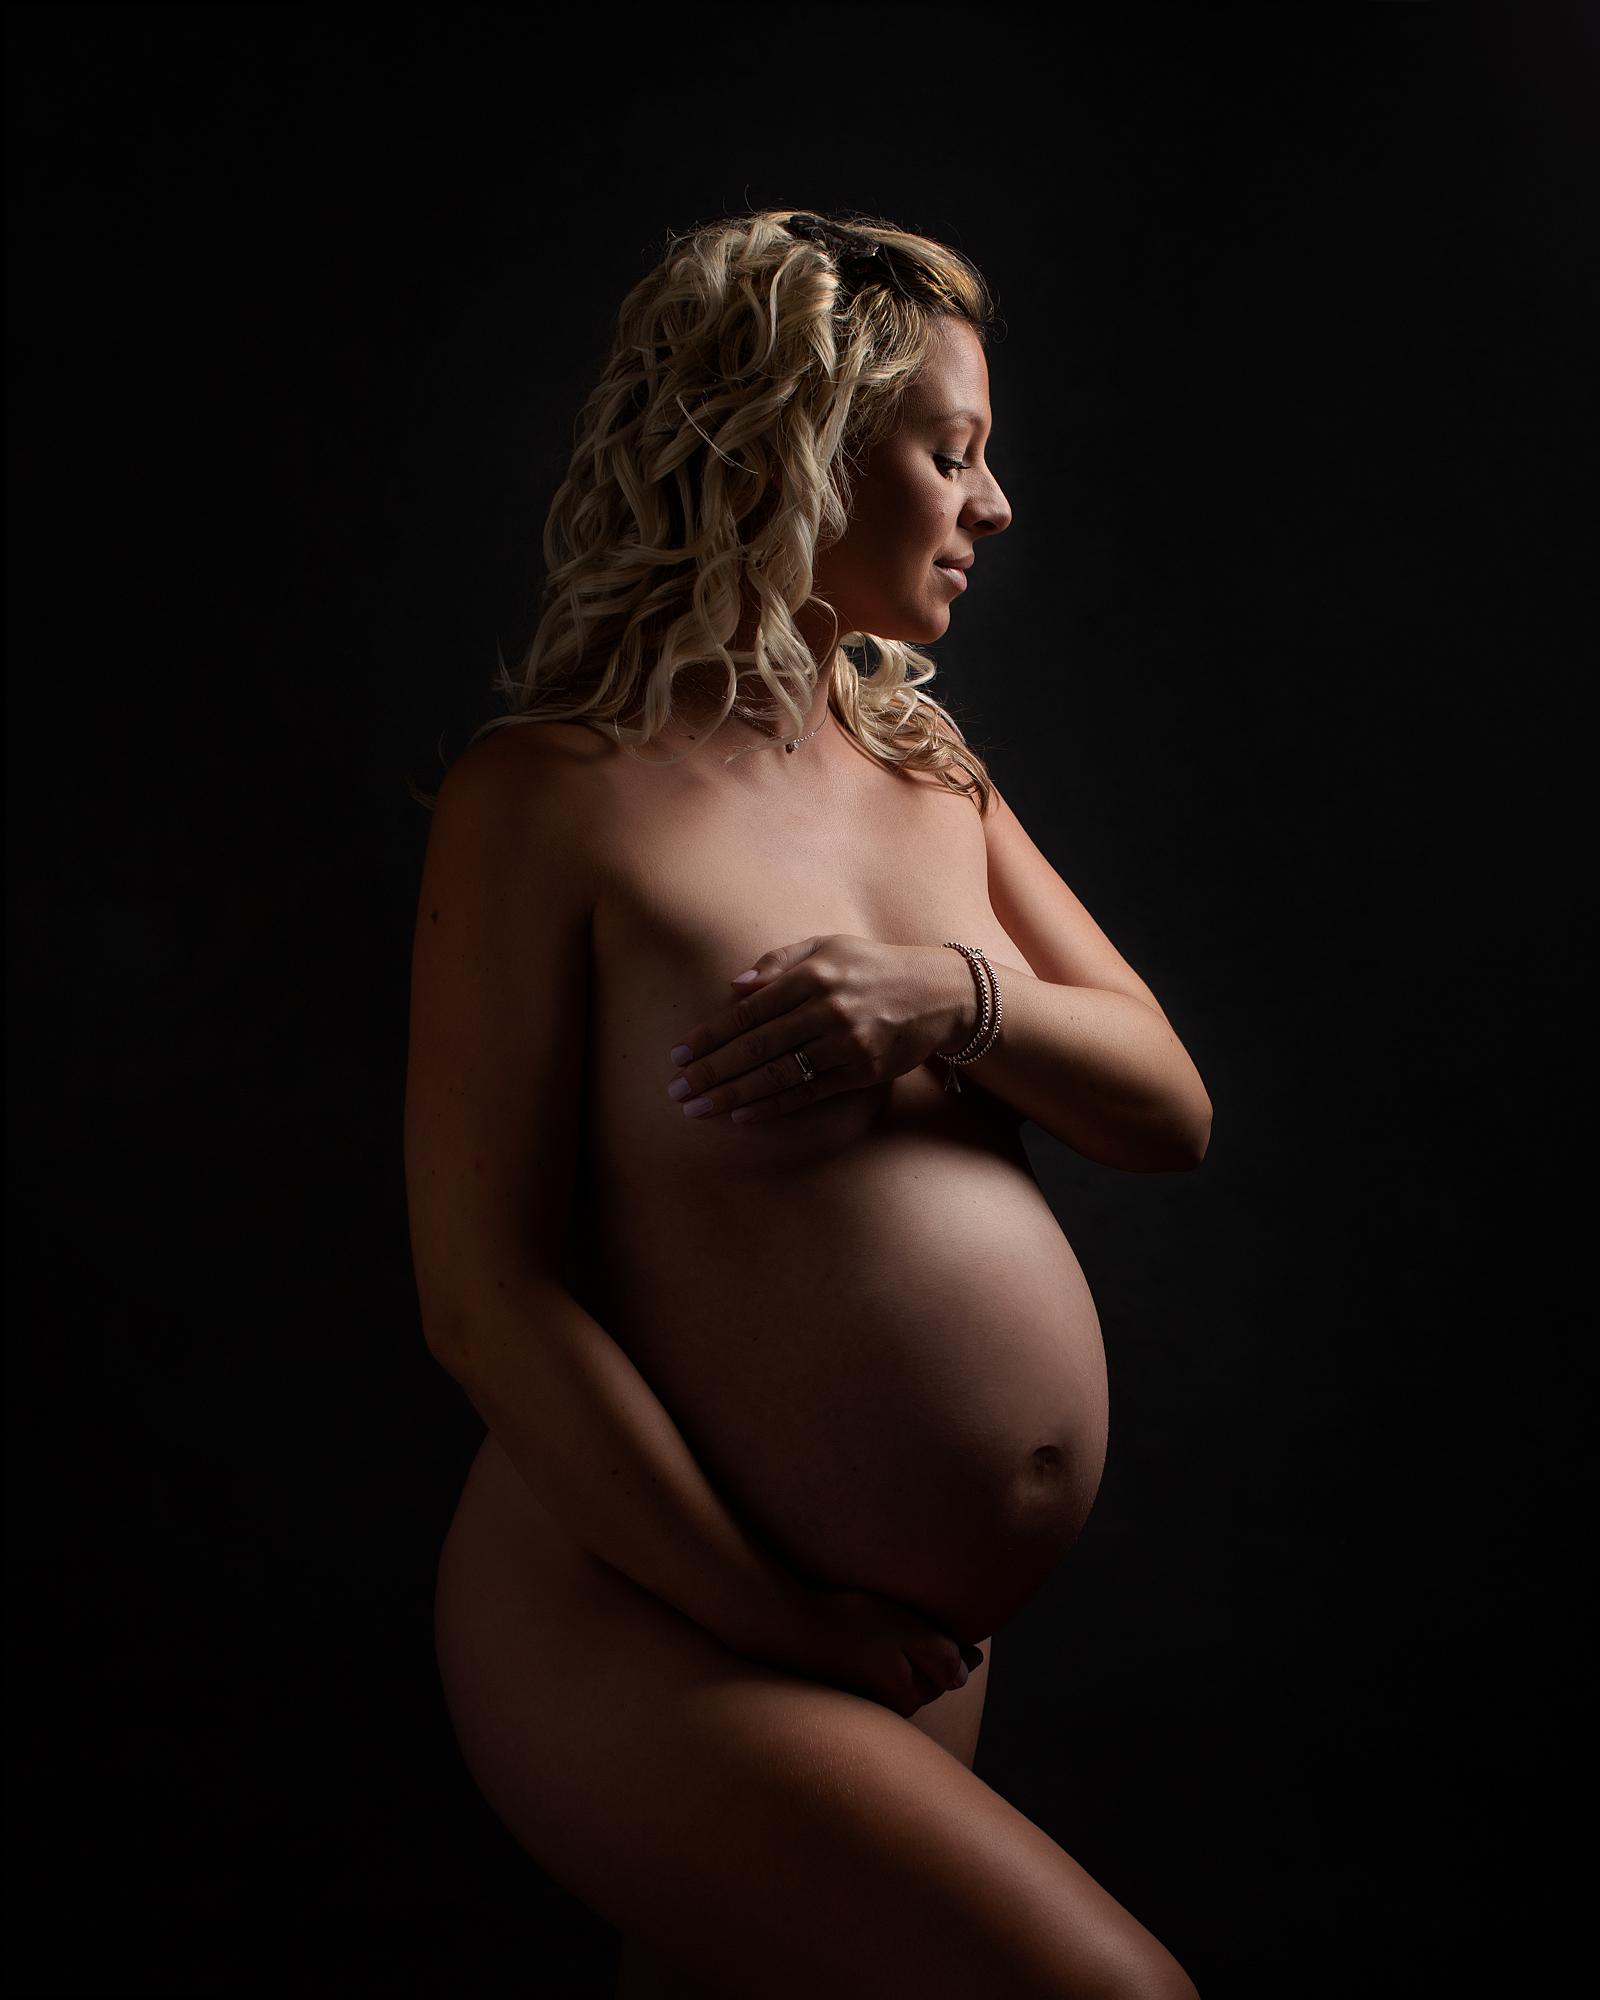 Pregnant woman posing against a black backdrop for a maternity photoshoot in Suffolk photography studio